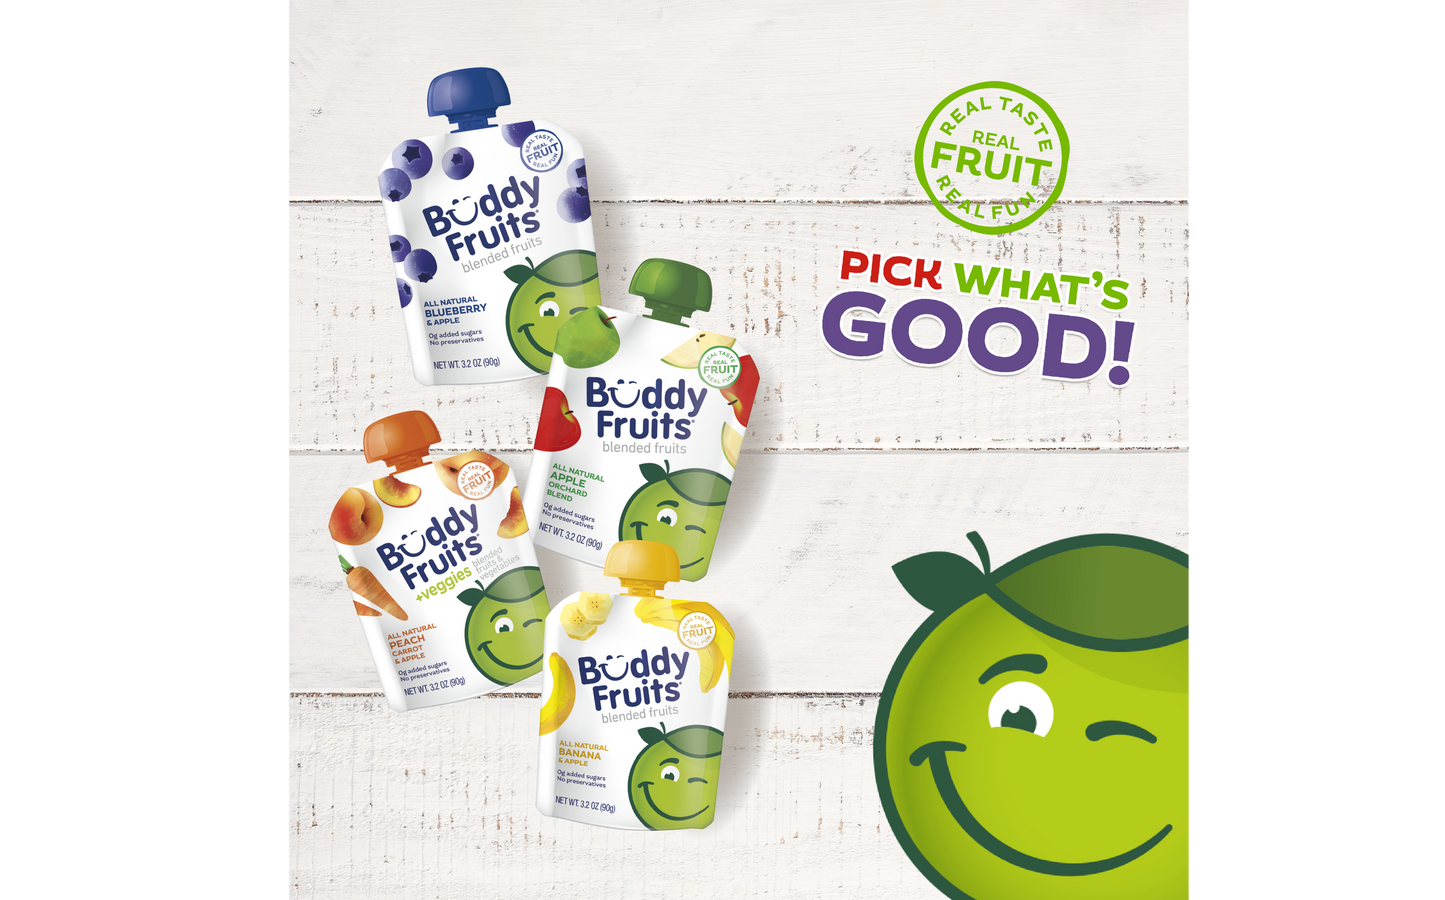 Pick what's good: Buddy Fruits Blueberry & Apple fruit pouch.